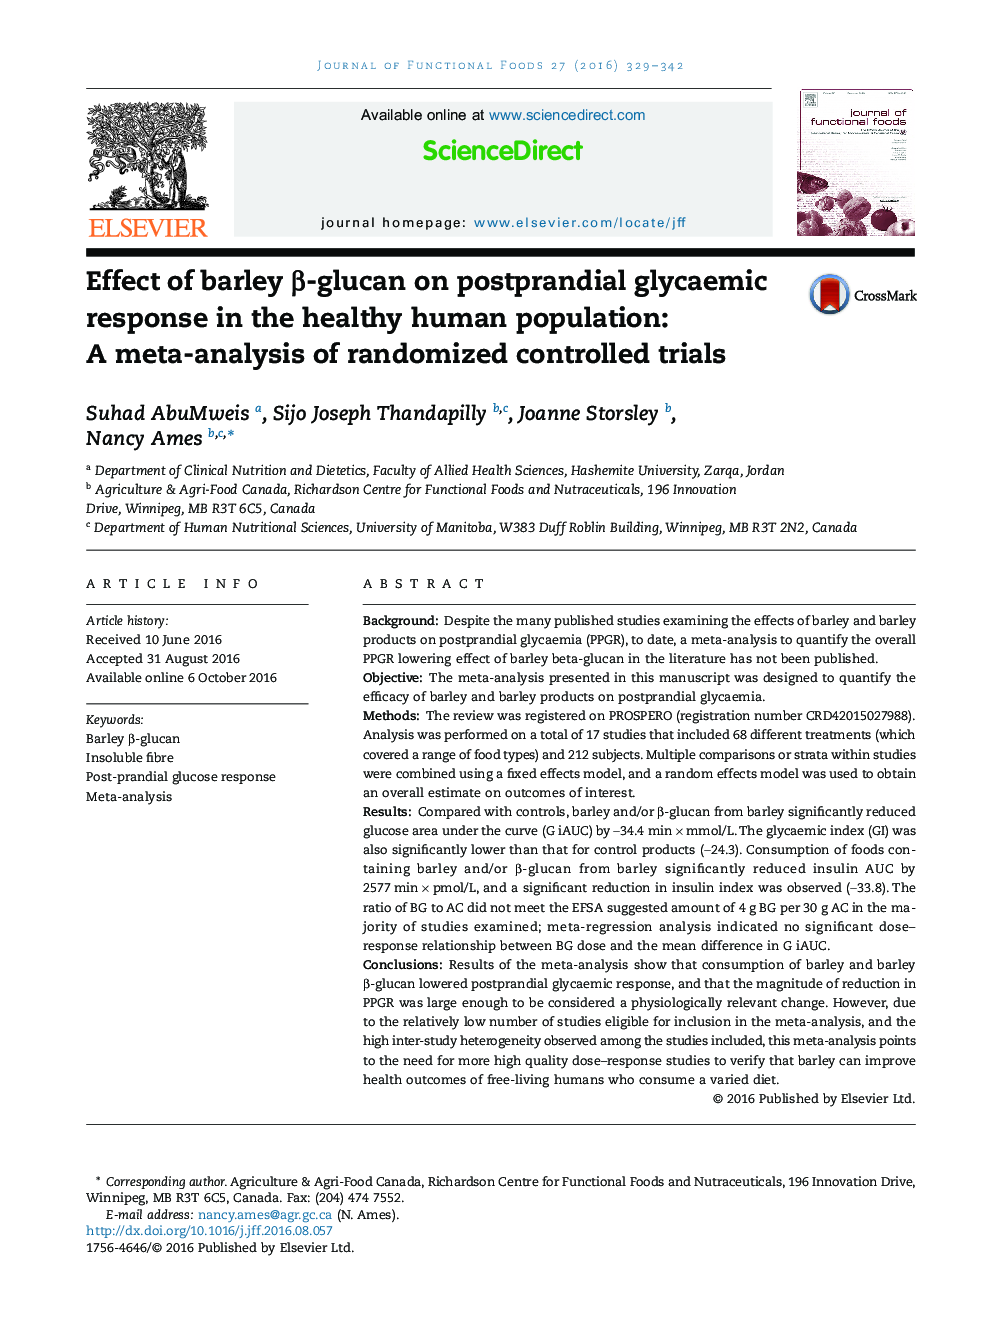 Effect of barley Î²-glucan on postprandial glycaemic response in the healthy human population: A meta-analysis of randomized controlled trials